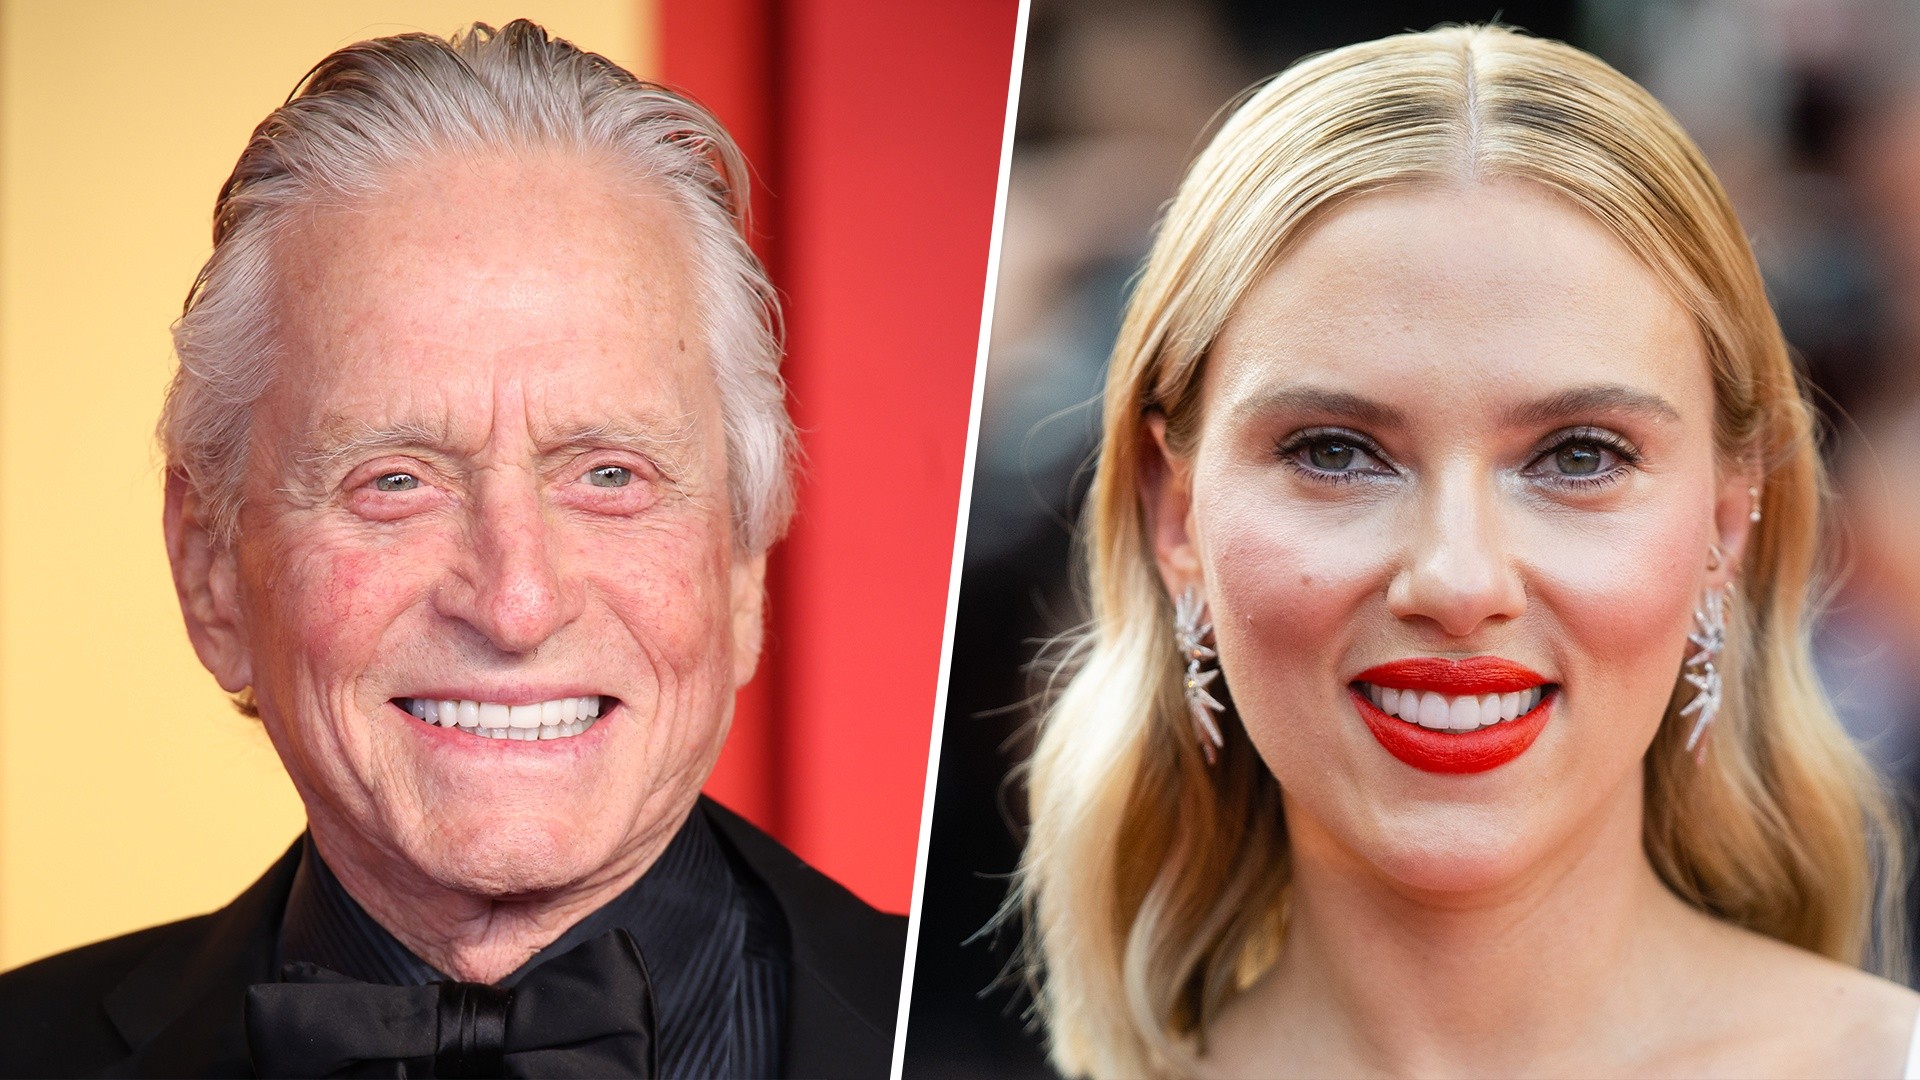 Michael Douglas discovers he's related to Scarlett Johansson